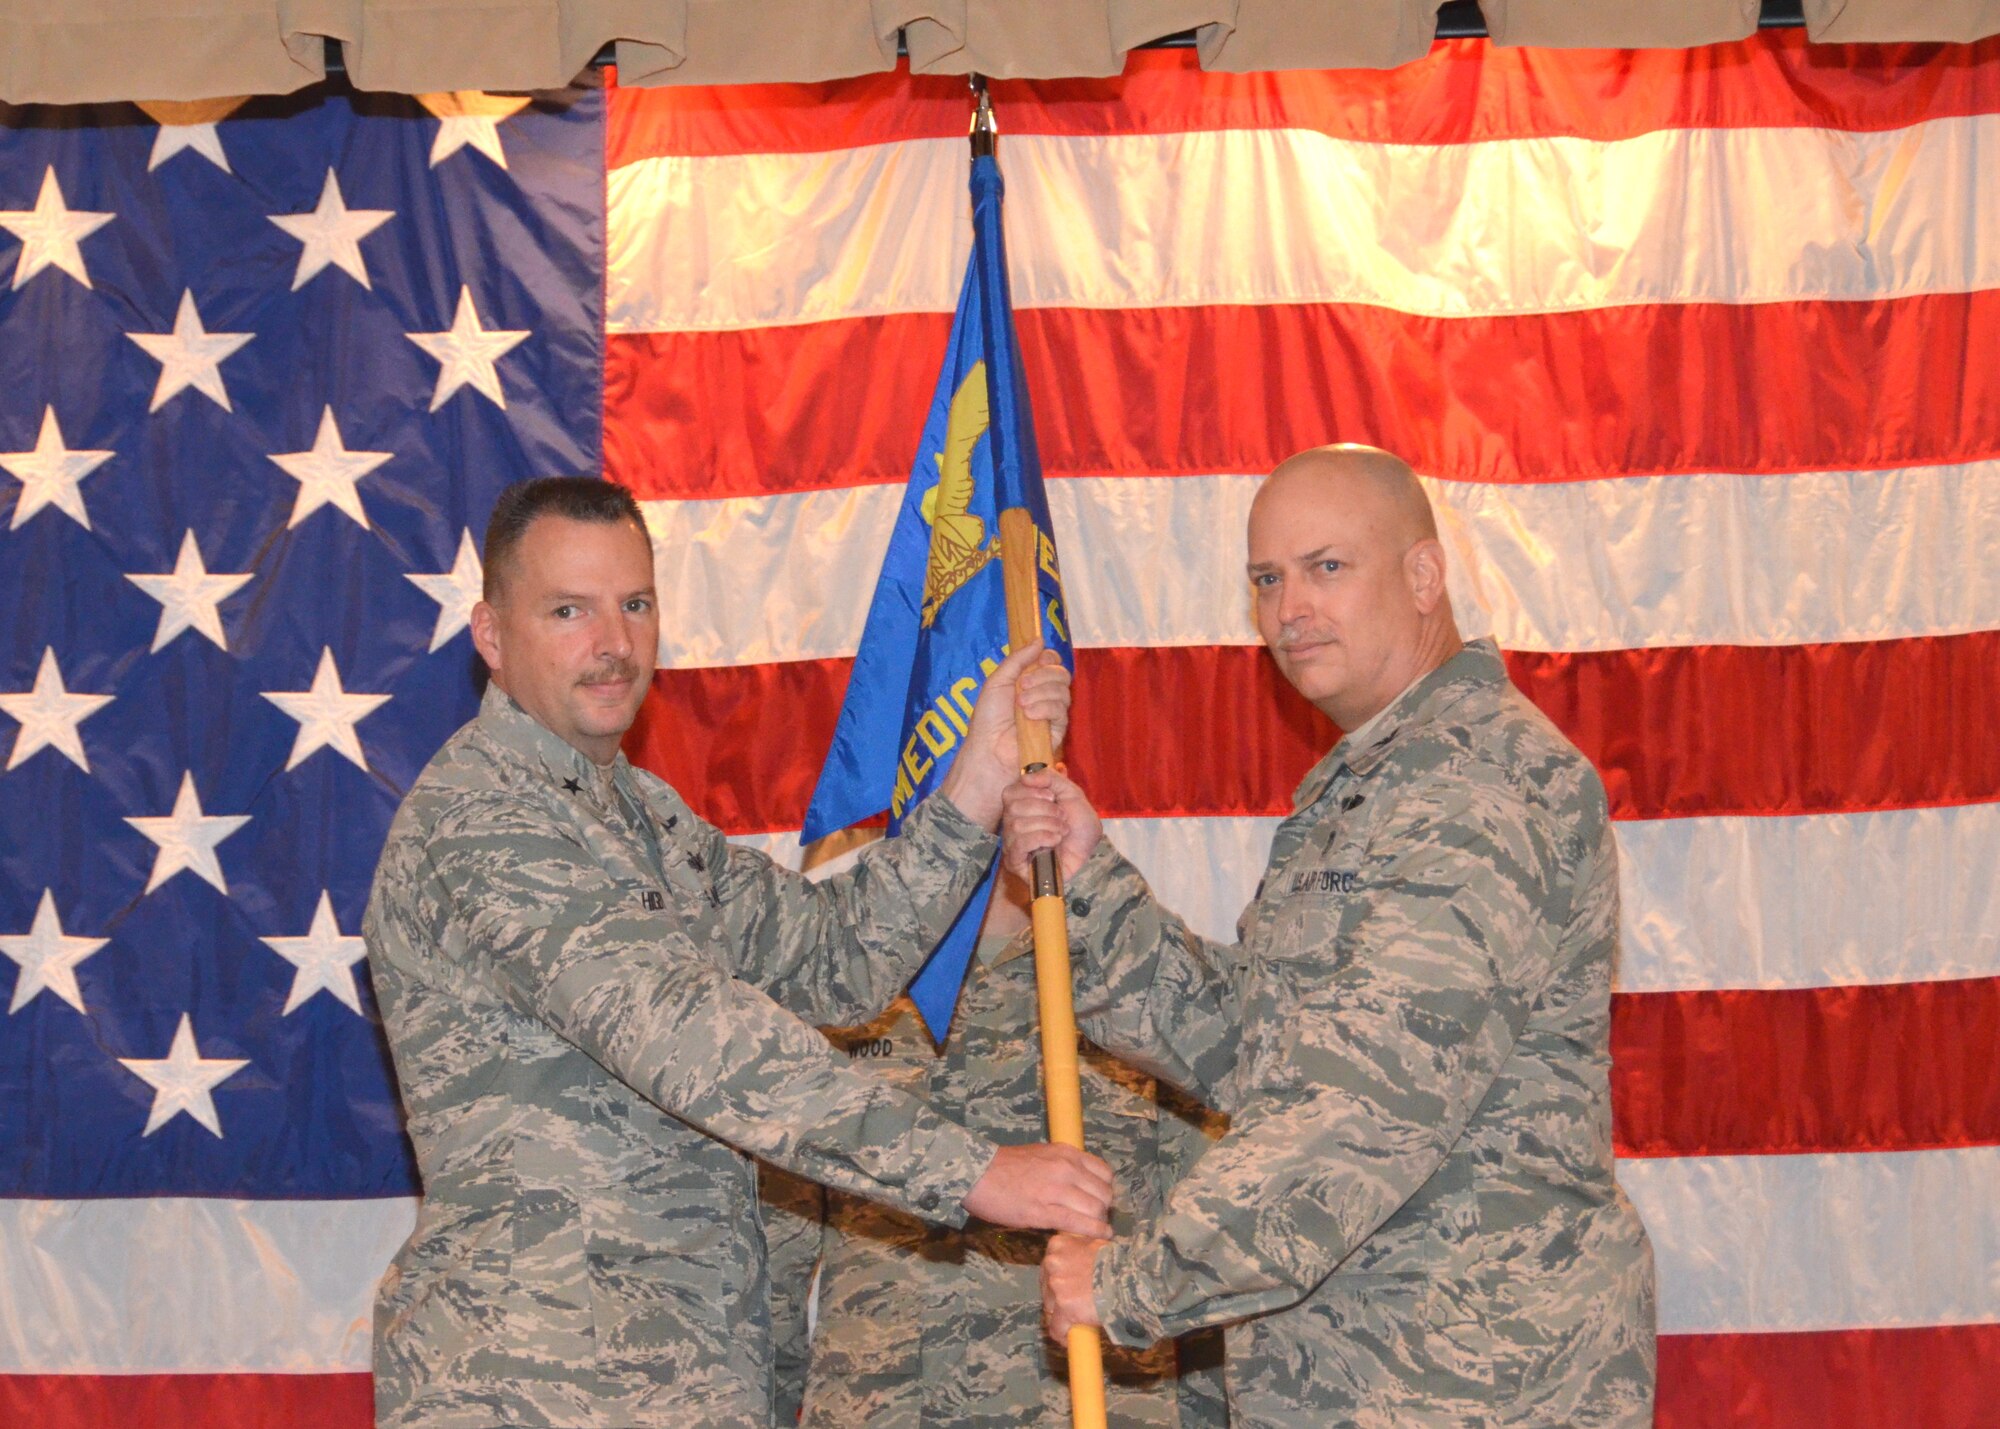 New 81st Medical Group and Keesler Medical Center commander Col. (Dr.) Thomas Harrell, right, accepts the unit guidon from Brig. Gen. Patrick Higby, 81st Training Wing commander, during the March 28 change of command ceremony held in  the medical center’s Don Wylie Auditorium.  The new commander comes to Keesler Air Force Base from Joint Base Elmendorf-Richardson, Alaska, where he commanded the Department of Defense/Veterans Affairs Joint Venture Hospital and also served as the Alaskan Command command surgeon.  Former commander Brig. Gen. (Dr.) Kory Cornum has been reassigned to Scott AFB, Ill., as Air Mobility Command command surgeon.